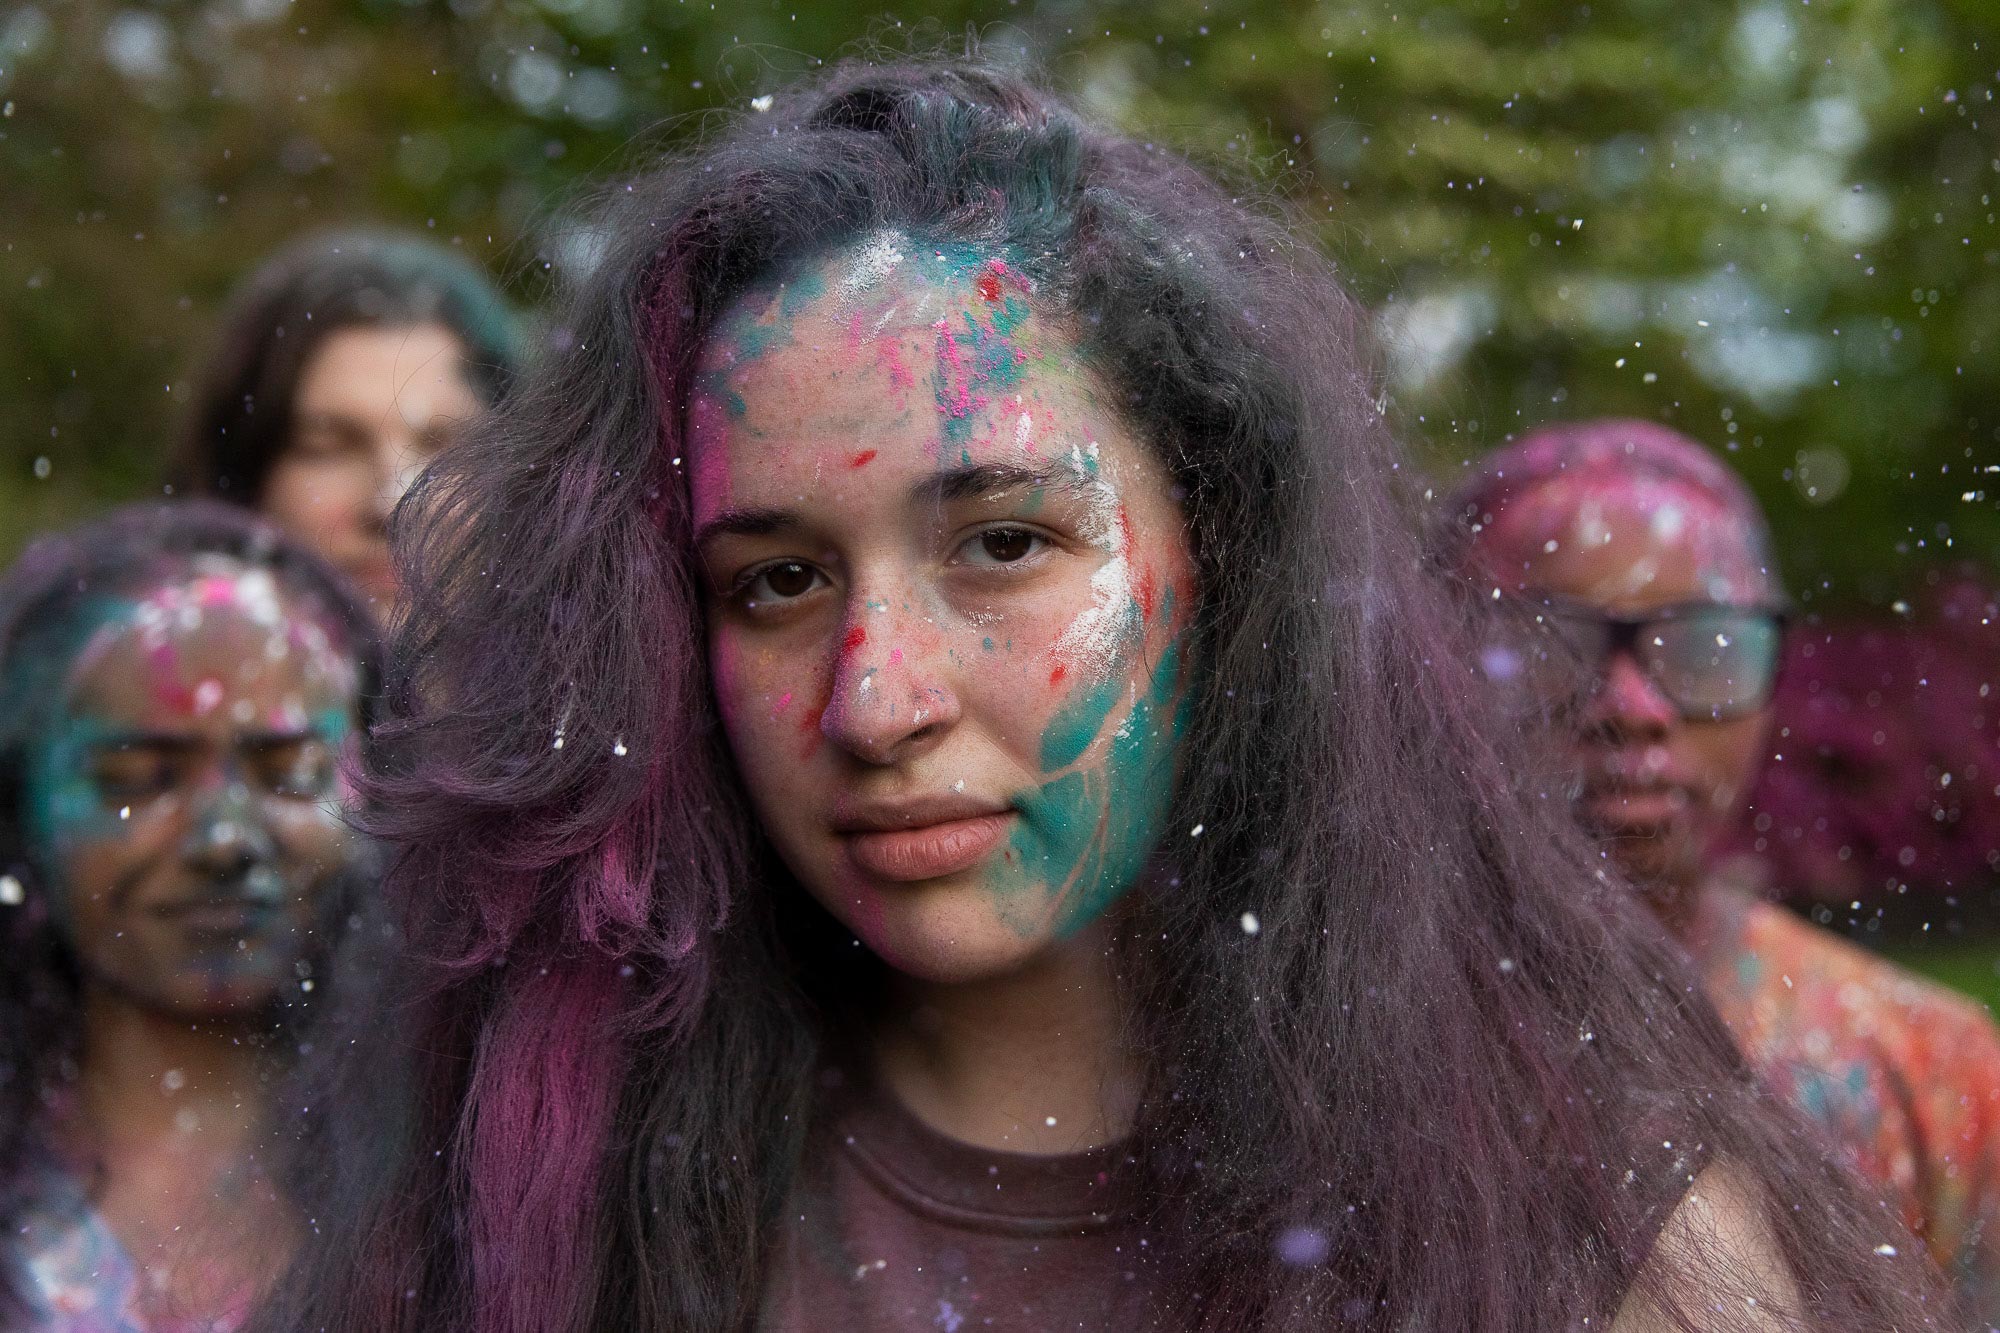 A close up portrait of a female with paint on her face